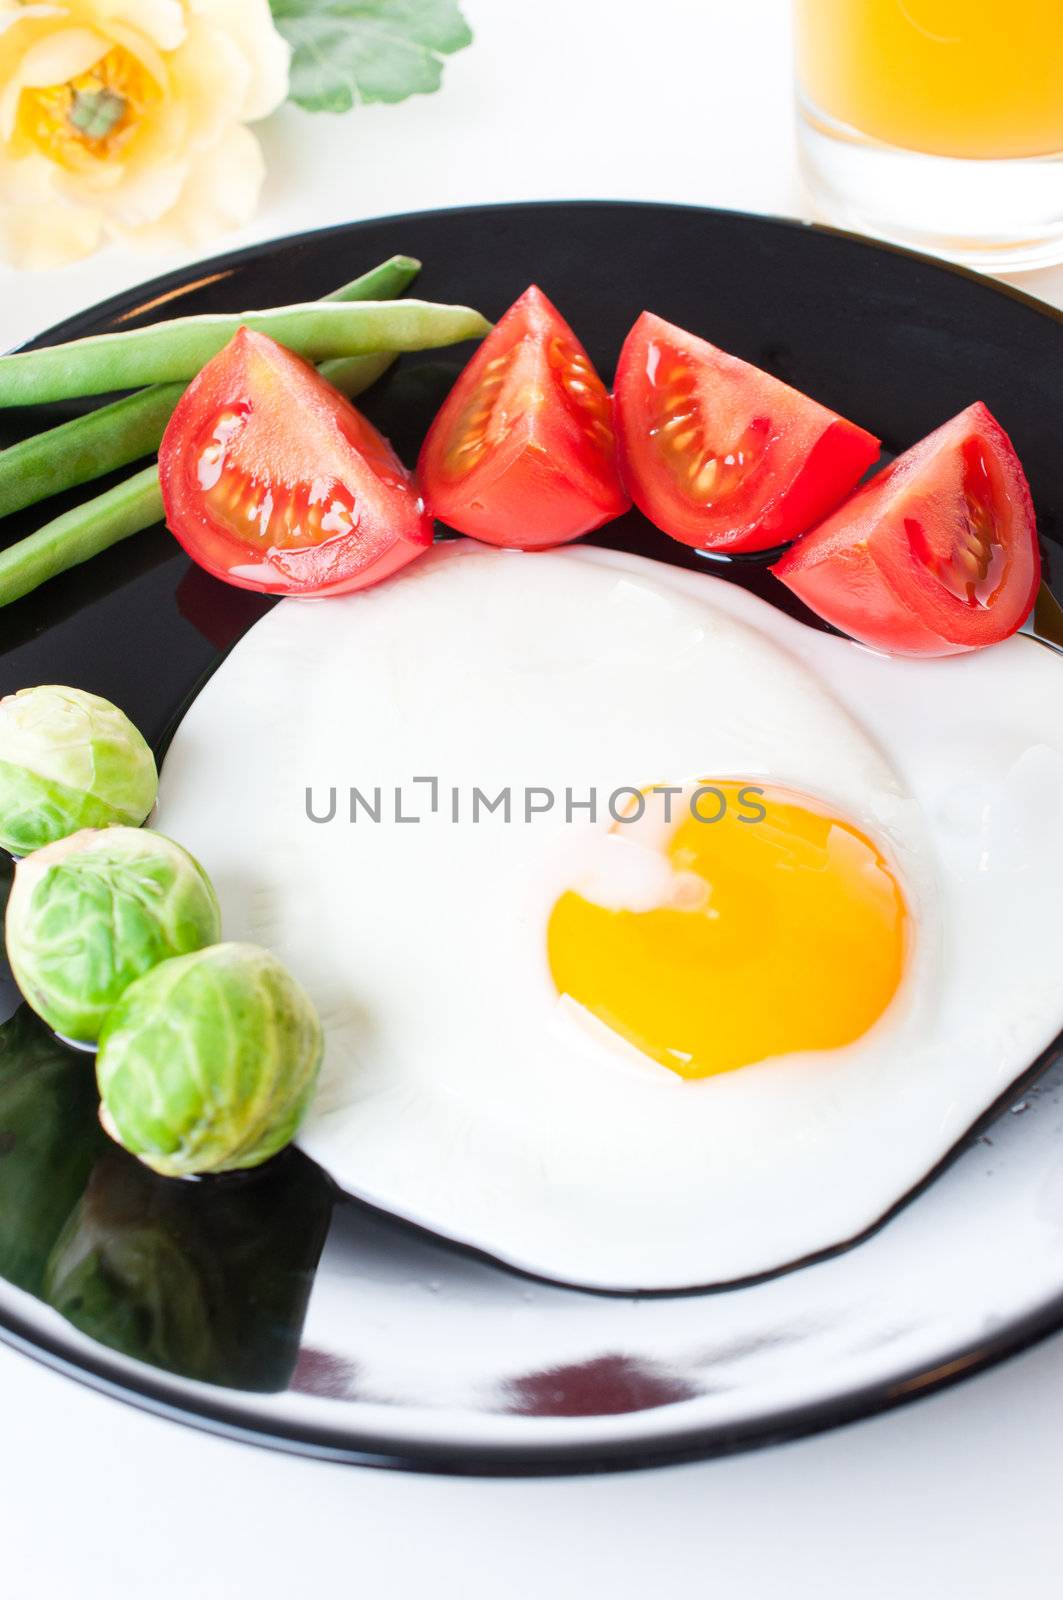 Fried egg with vegetables for breakfast on white background